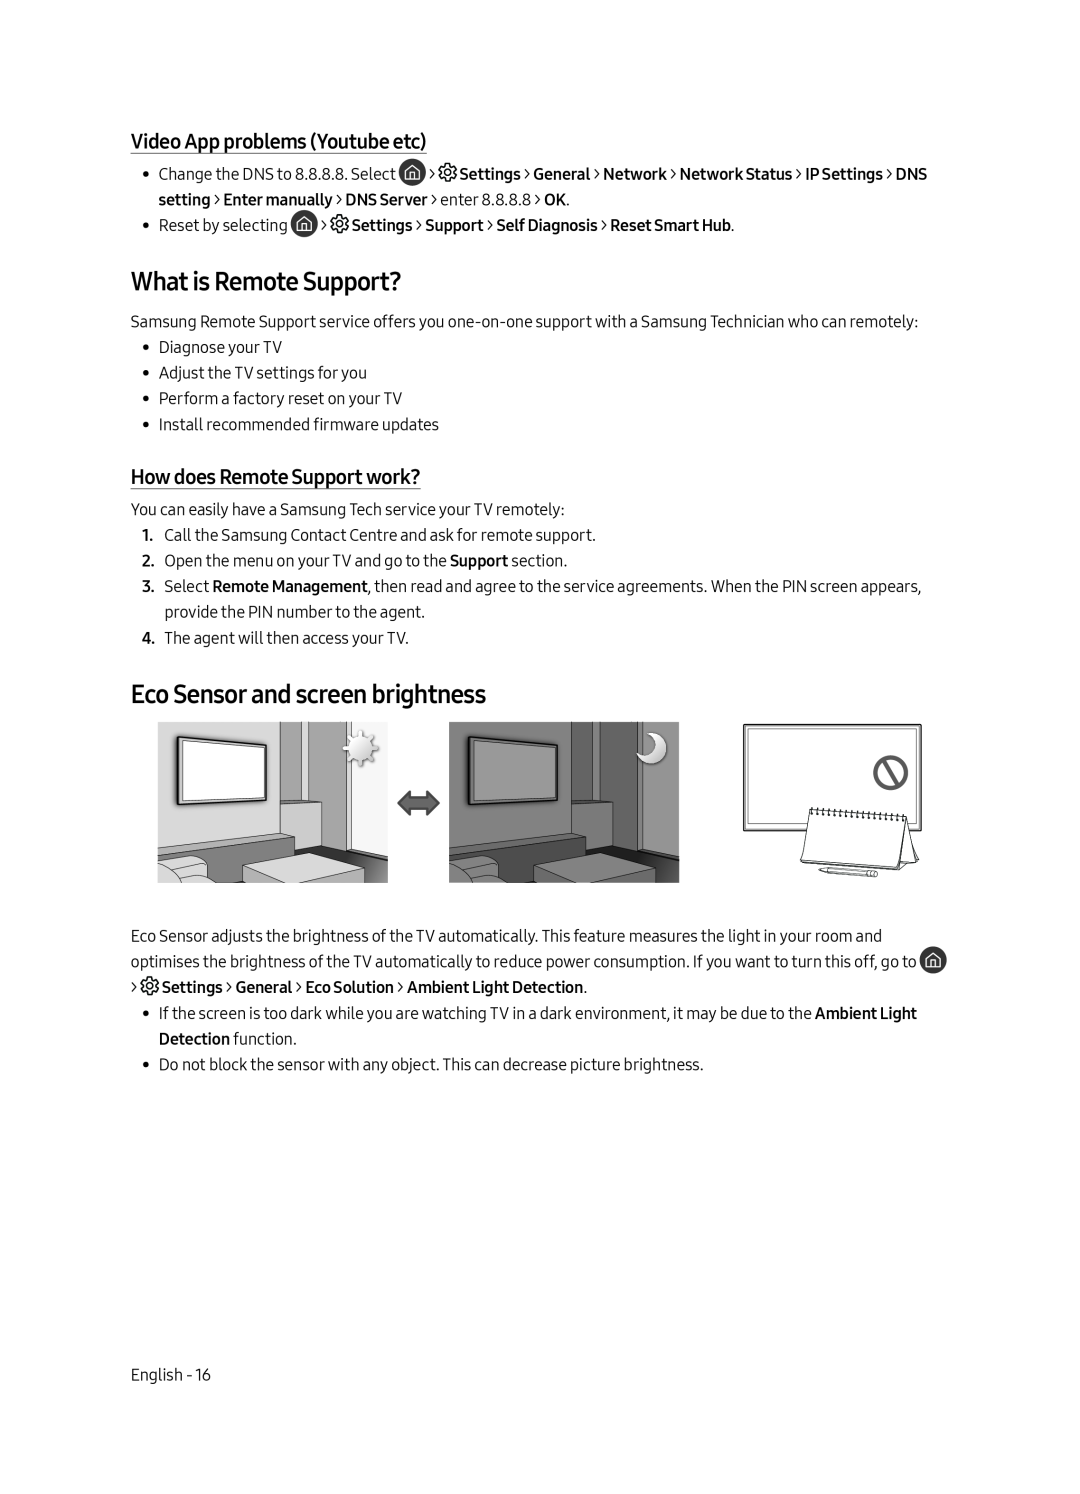 Samsung UE49MU9009TXZG manual What is Remote Support?, Eco Sensor and screen brightness, Video App problems Youtube etc 